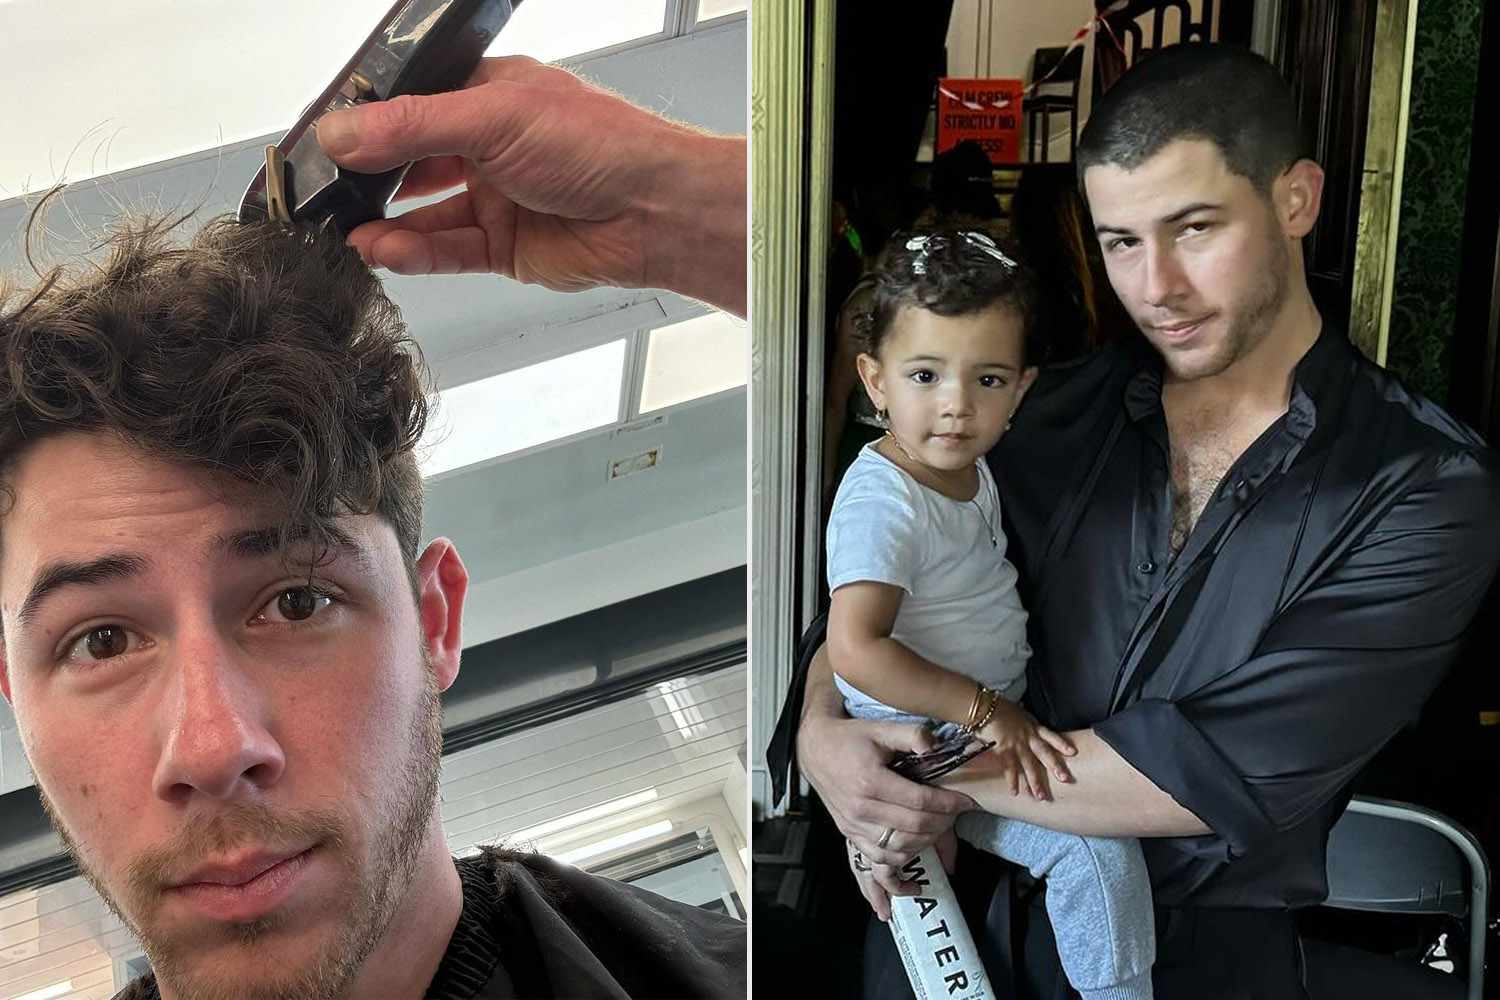 Nick Jonas Reveals Newly Shaved Head in Cute Picture with Daughter Malti in Dublin